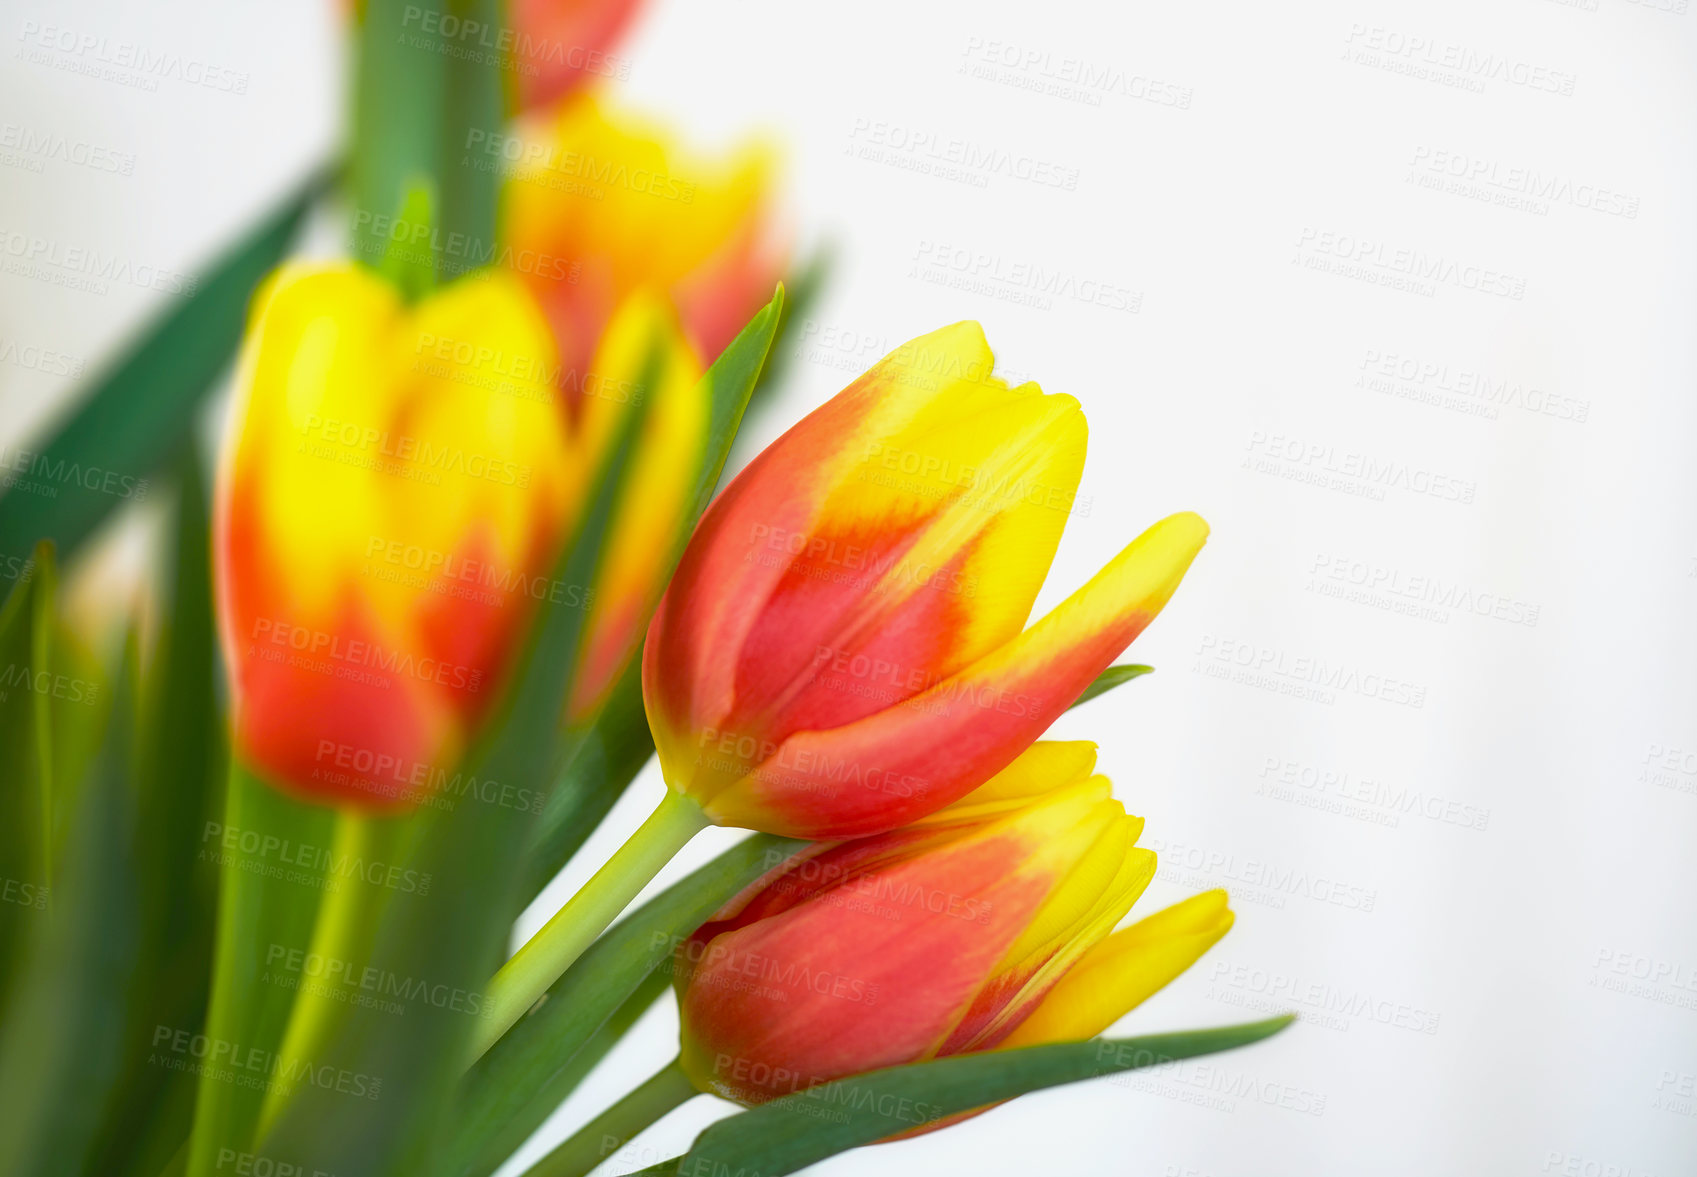 Buy stock photo Fresh orange and yellow tulips against a white background. Closeup of bunch of beautiful flowers with vibrant petals and green leaves. Blossoming bouquet symbolizing hope and love for valentines day